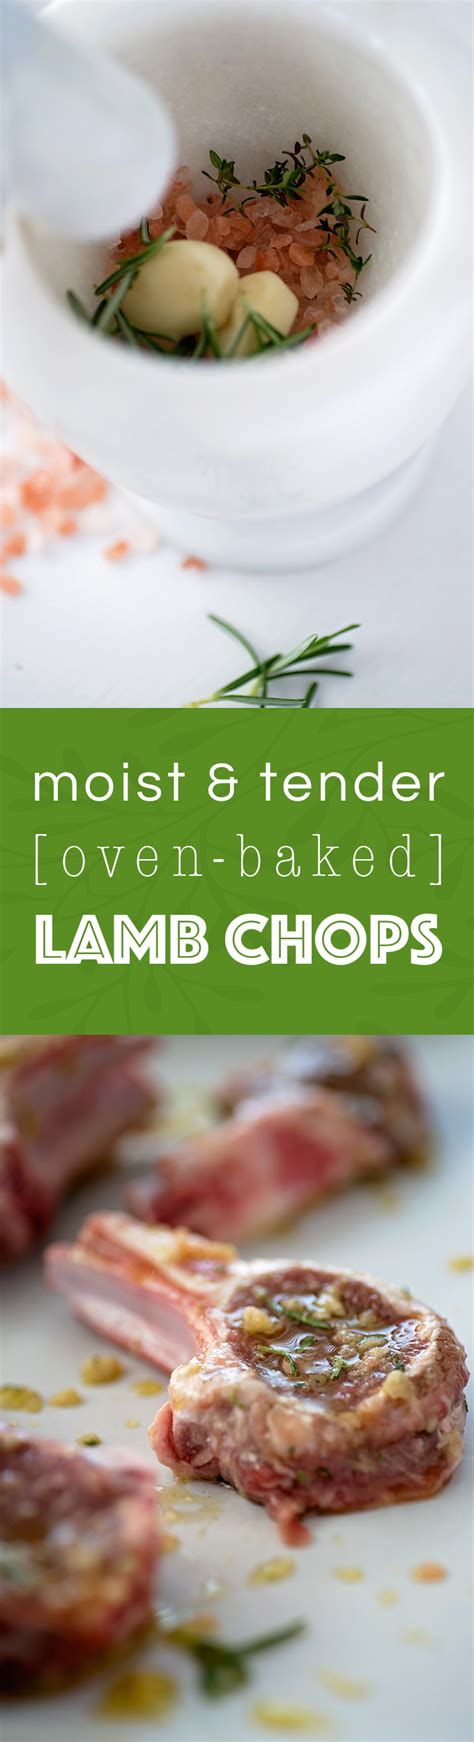 Marinate them in rosemary and garlic, sear them quickly on the stovetop, and dinner is served. Baked Lamb Chops | Recipe | Oven baked lamb chops, Baked ...